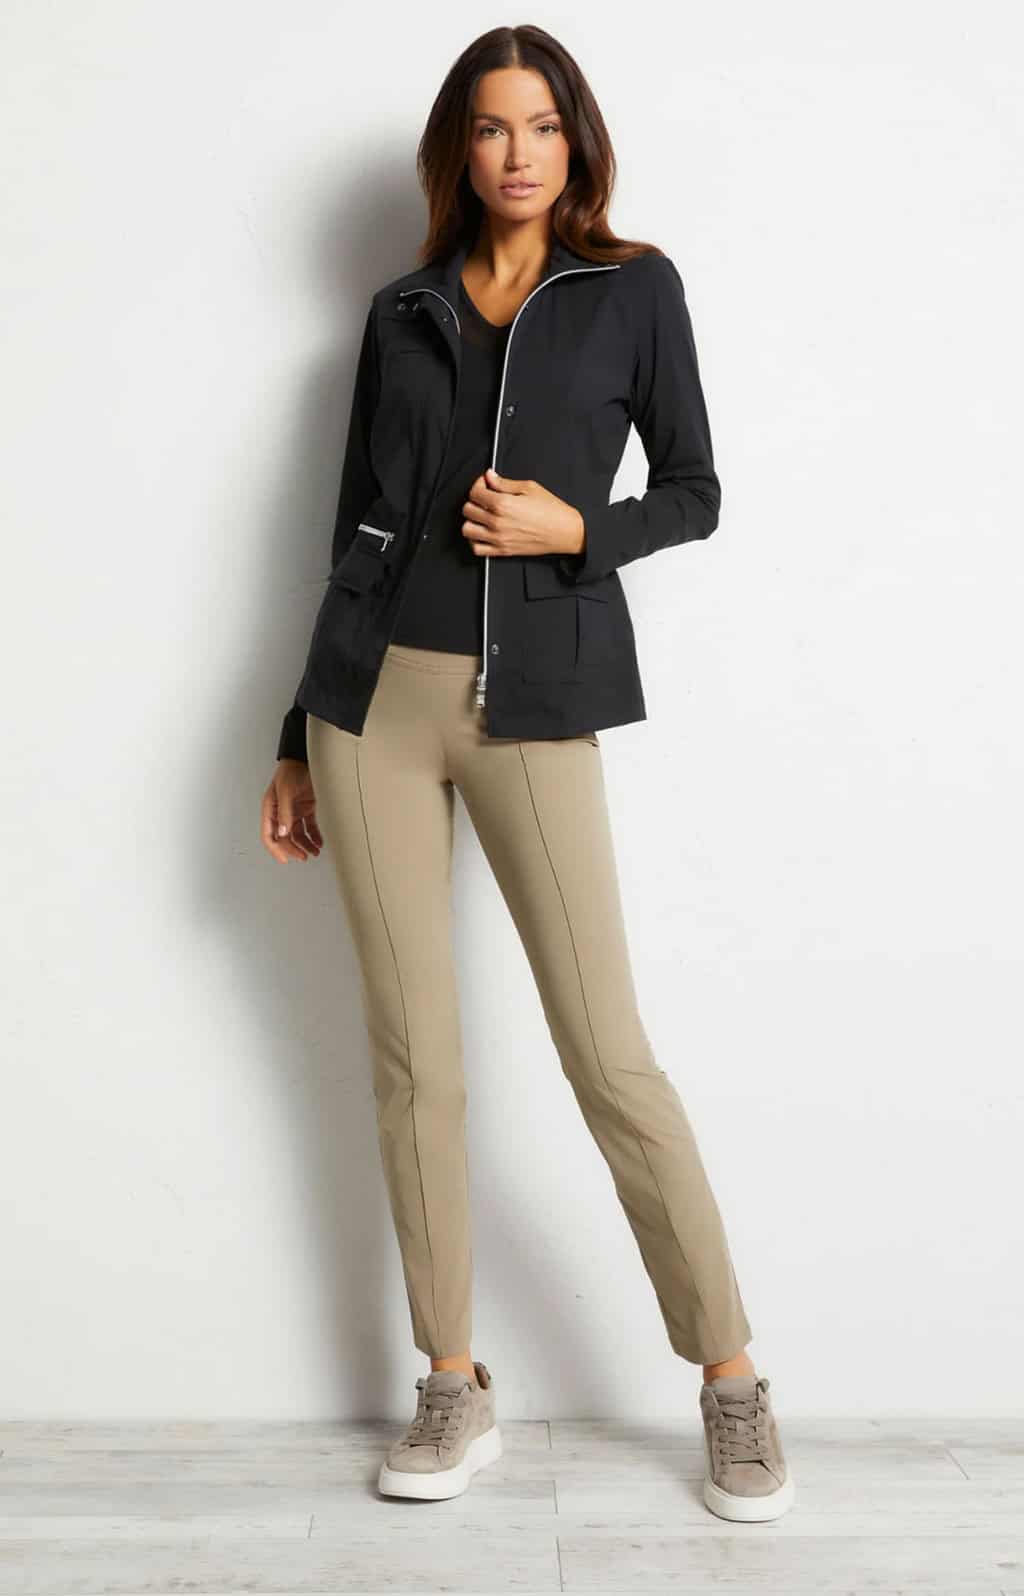 Attractive woman modelling a travel jacket in black with tan pants.